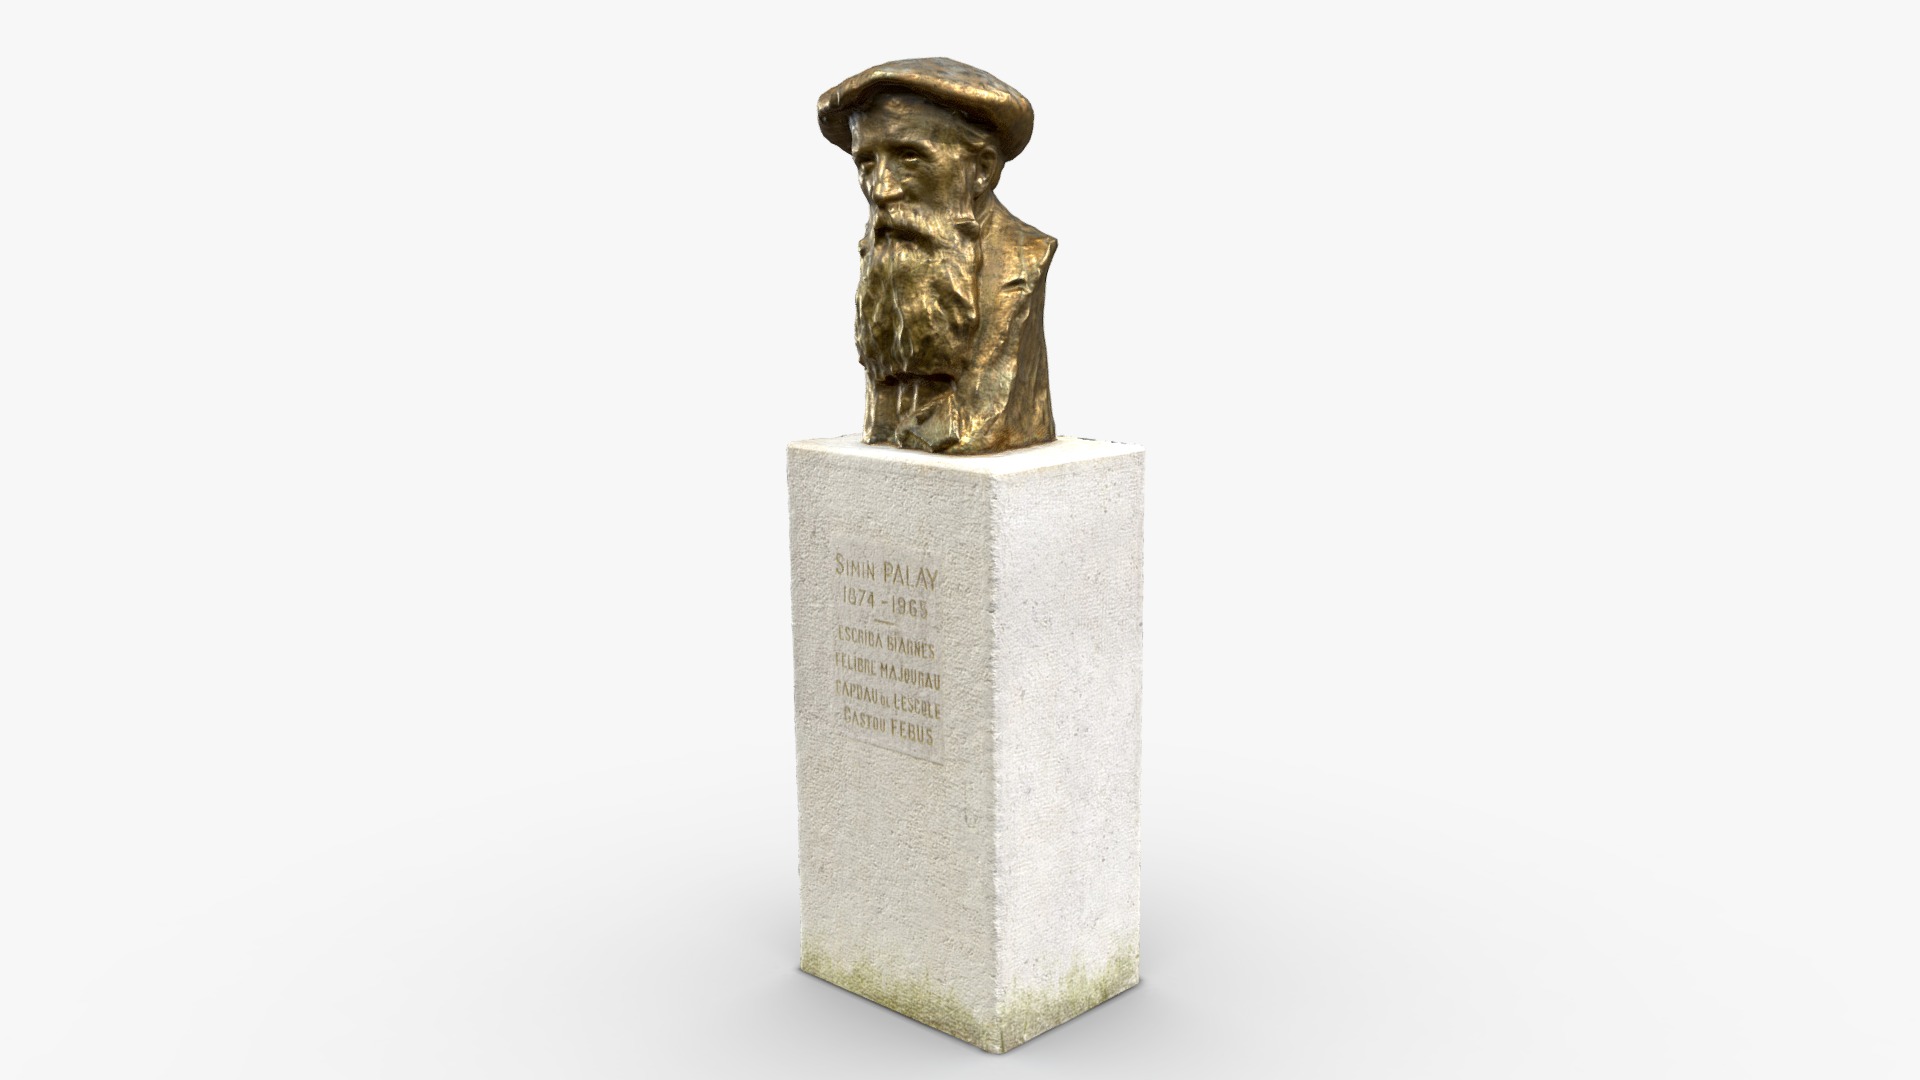 3D model [3D SCAN] – Statue Simin Palay - This is a 3D model of the [3D SCAN] - Statue Simin Palay. The 3D model is about a statue of a person.